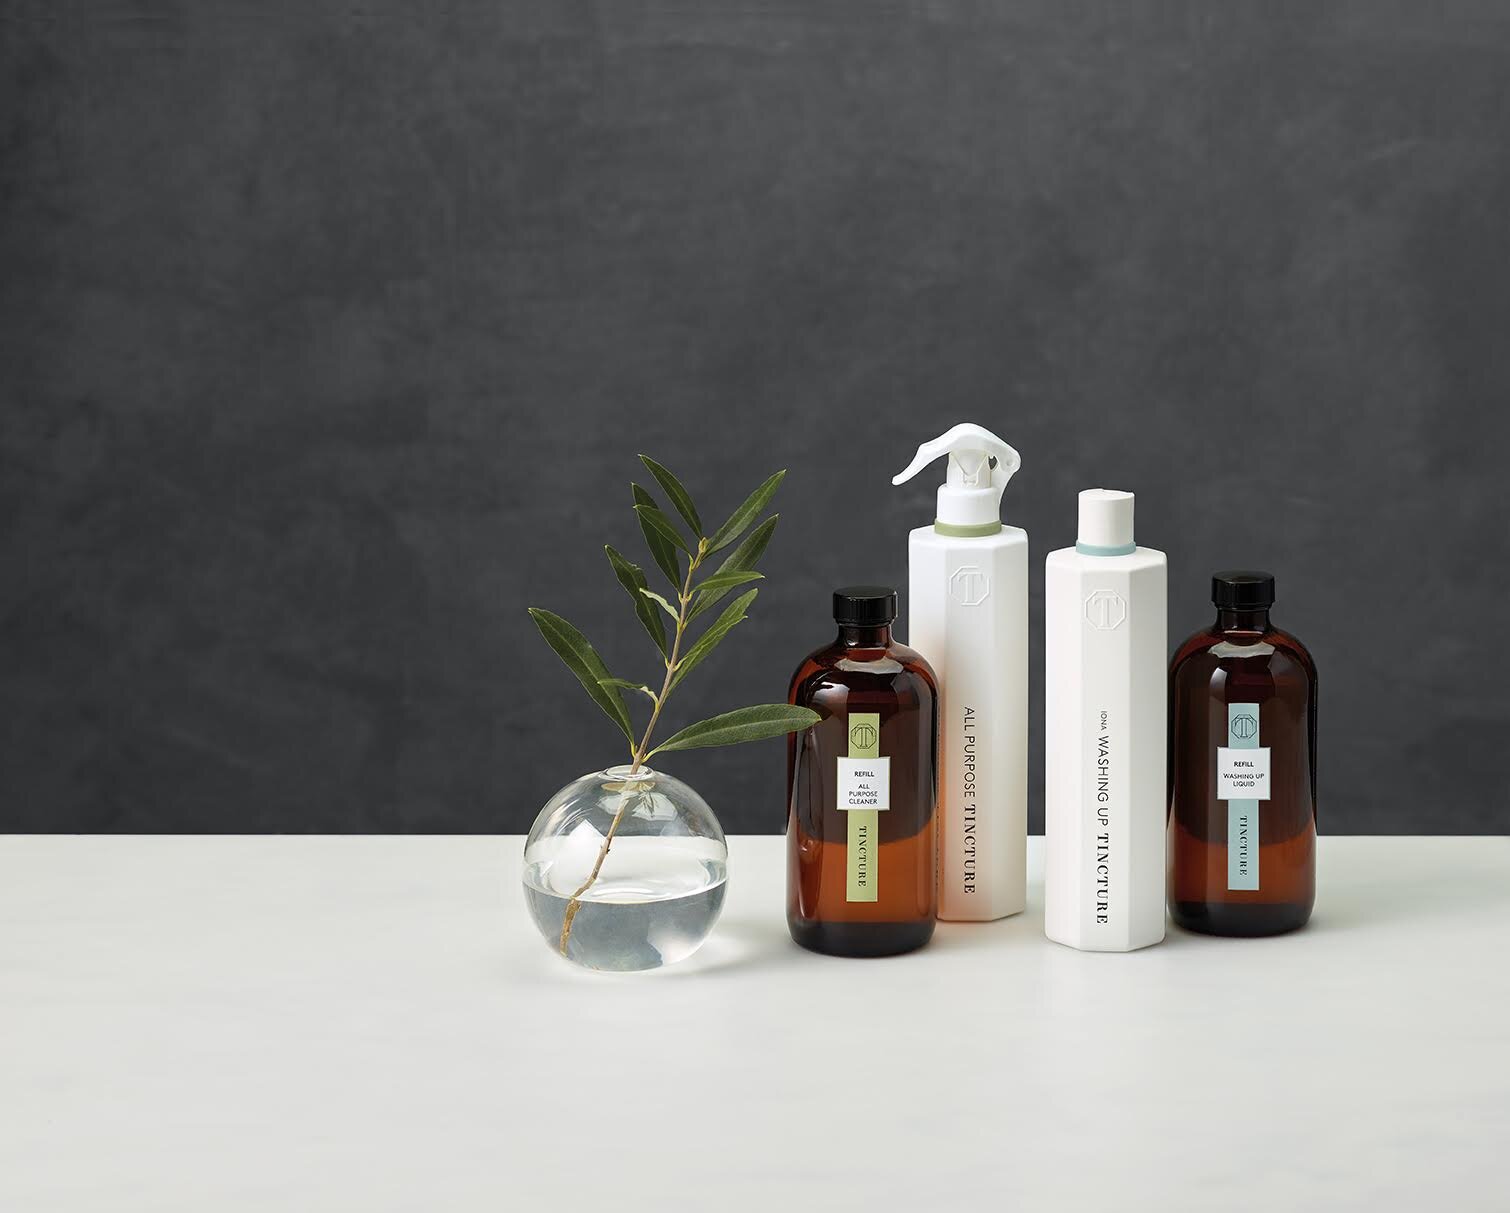 natural cleaning products by Tincture